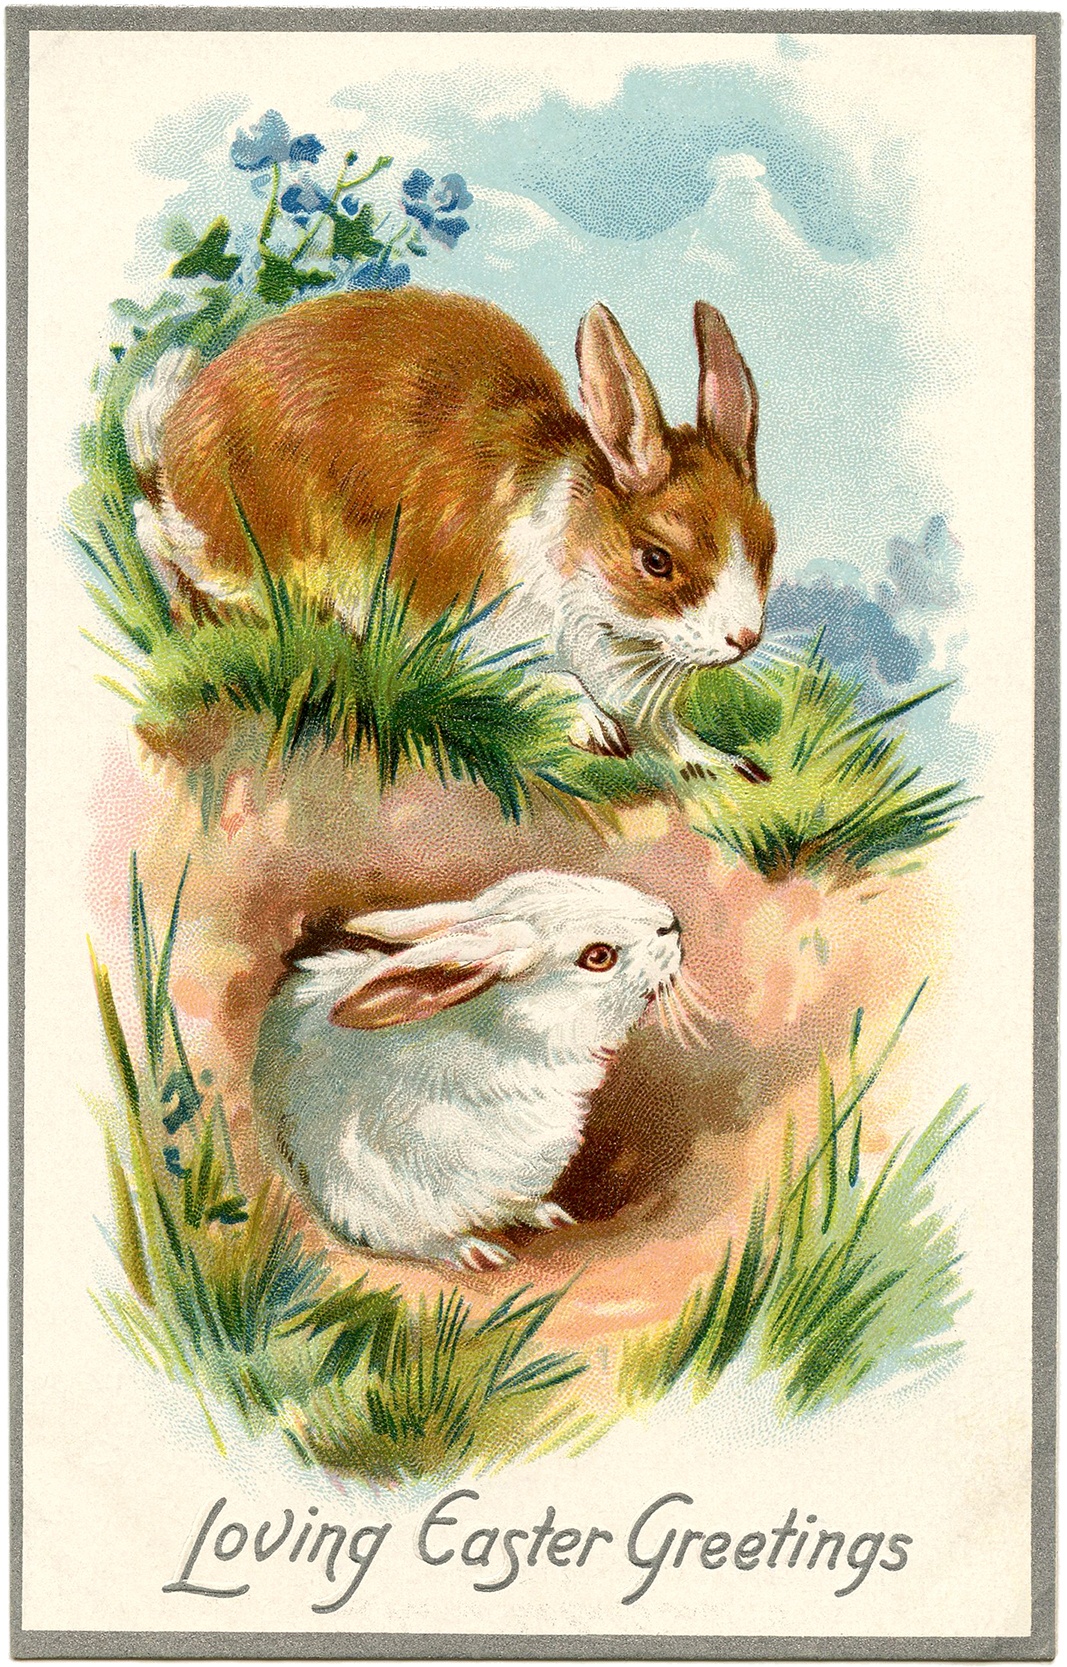 21 Easter Bunny Images Free - Updated! - The Graphics Fairy - Free Printable Vintage Easter Images